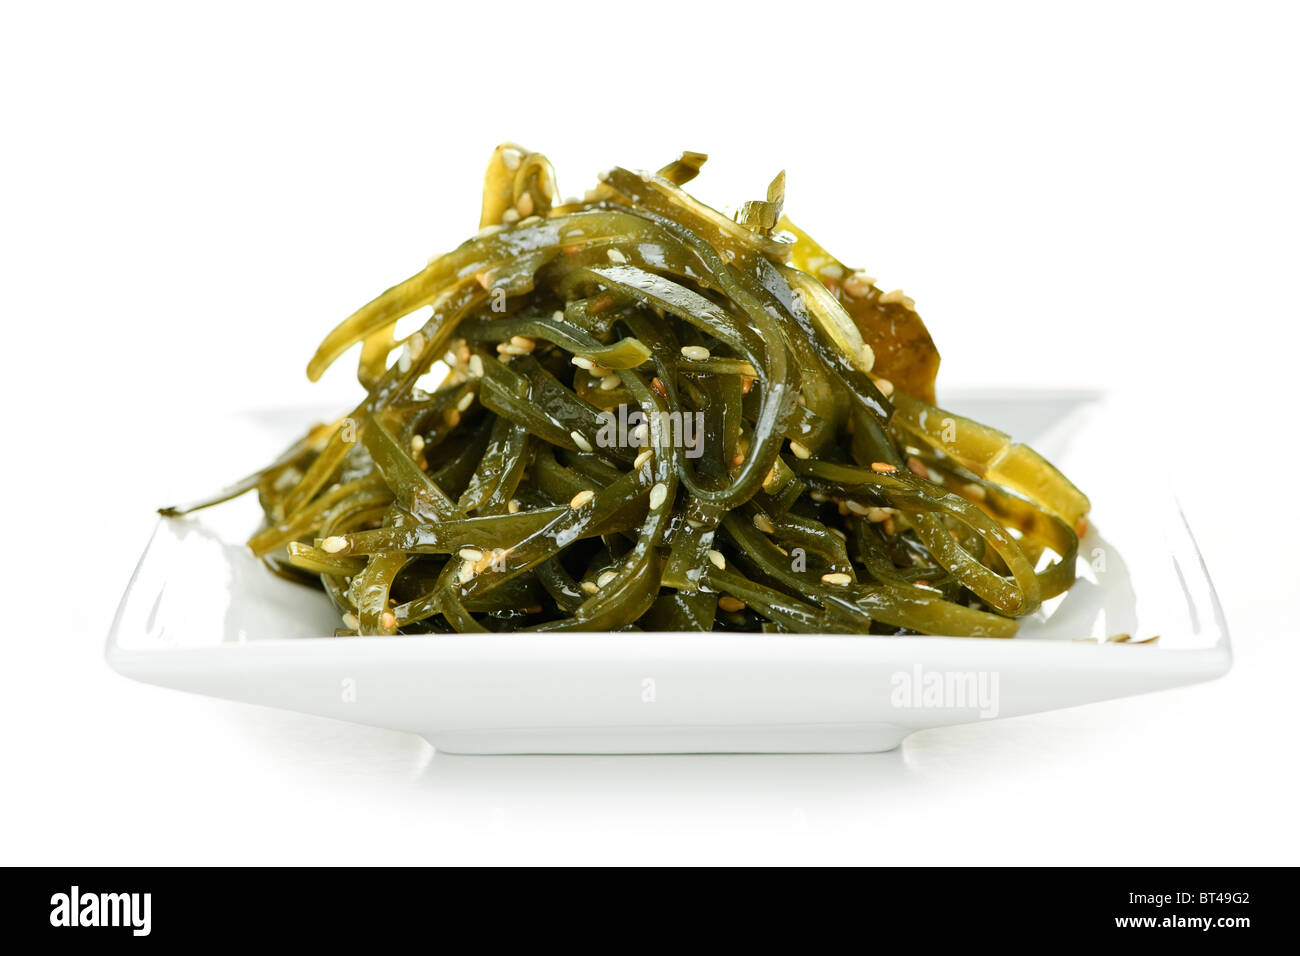 Plate of wakame seaweed salad on white background Stock Photo